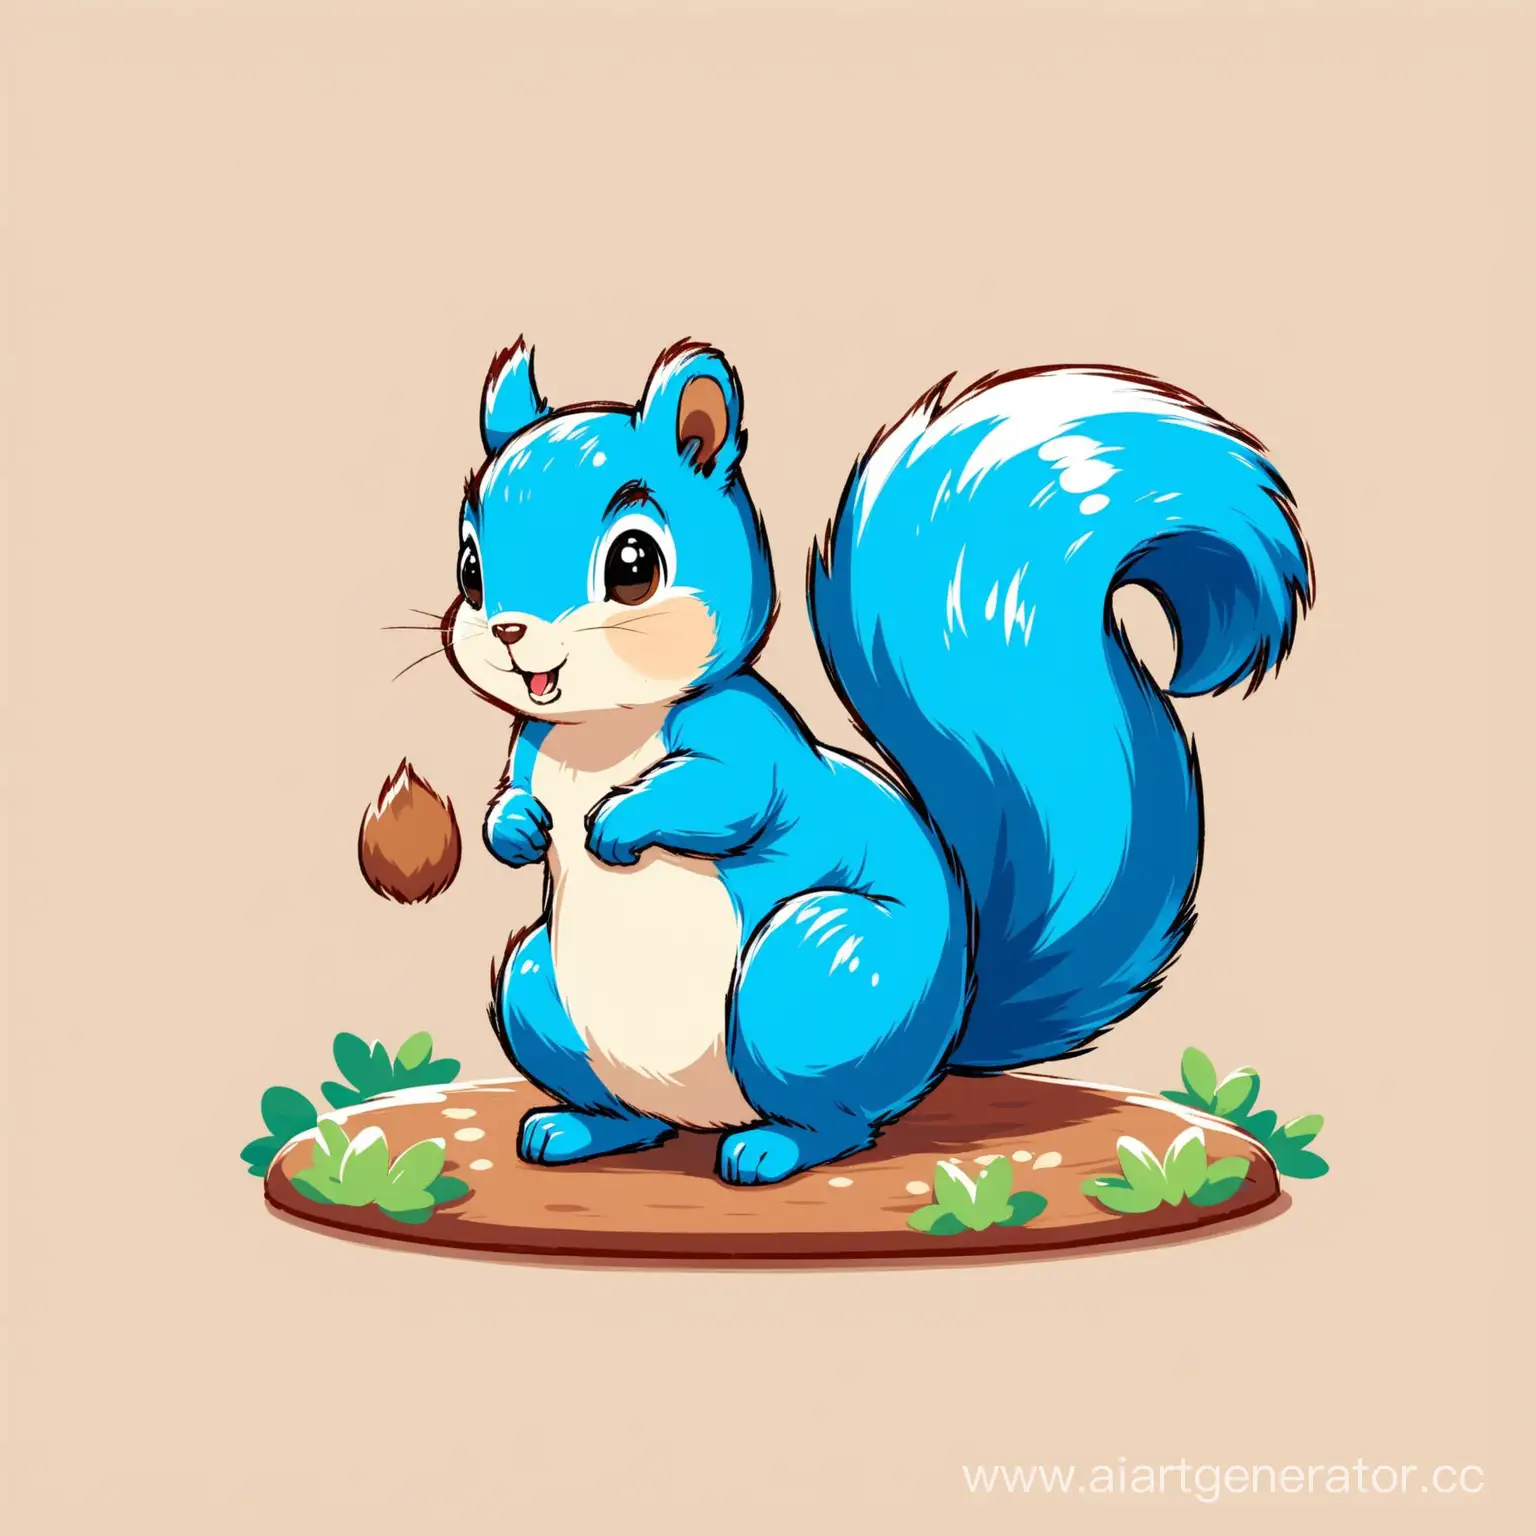 BlueTailed-Squirrel-Illustration-in-2D-Style